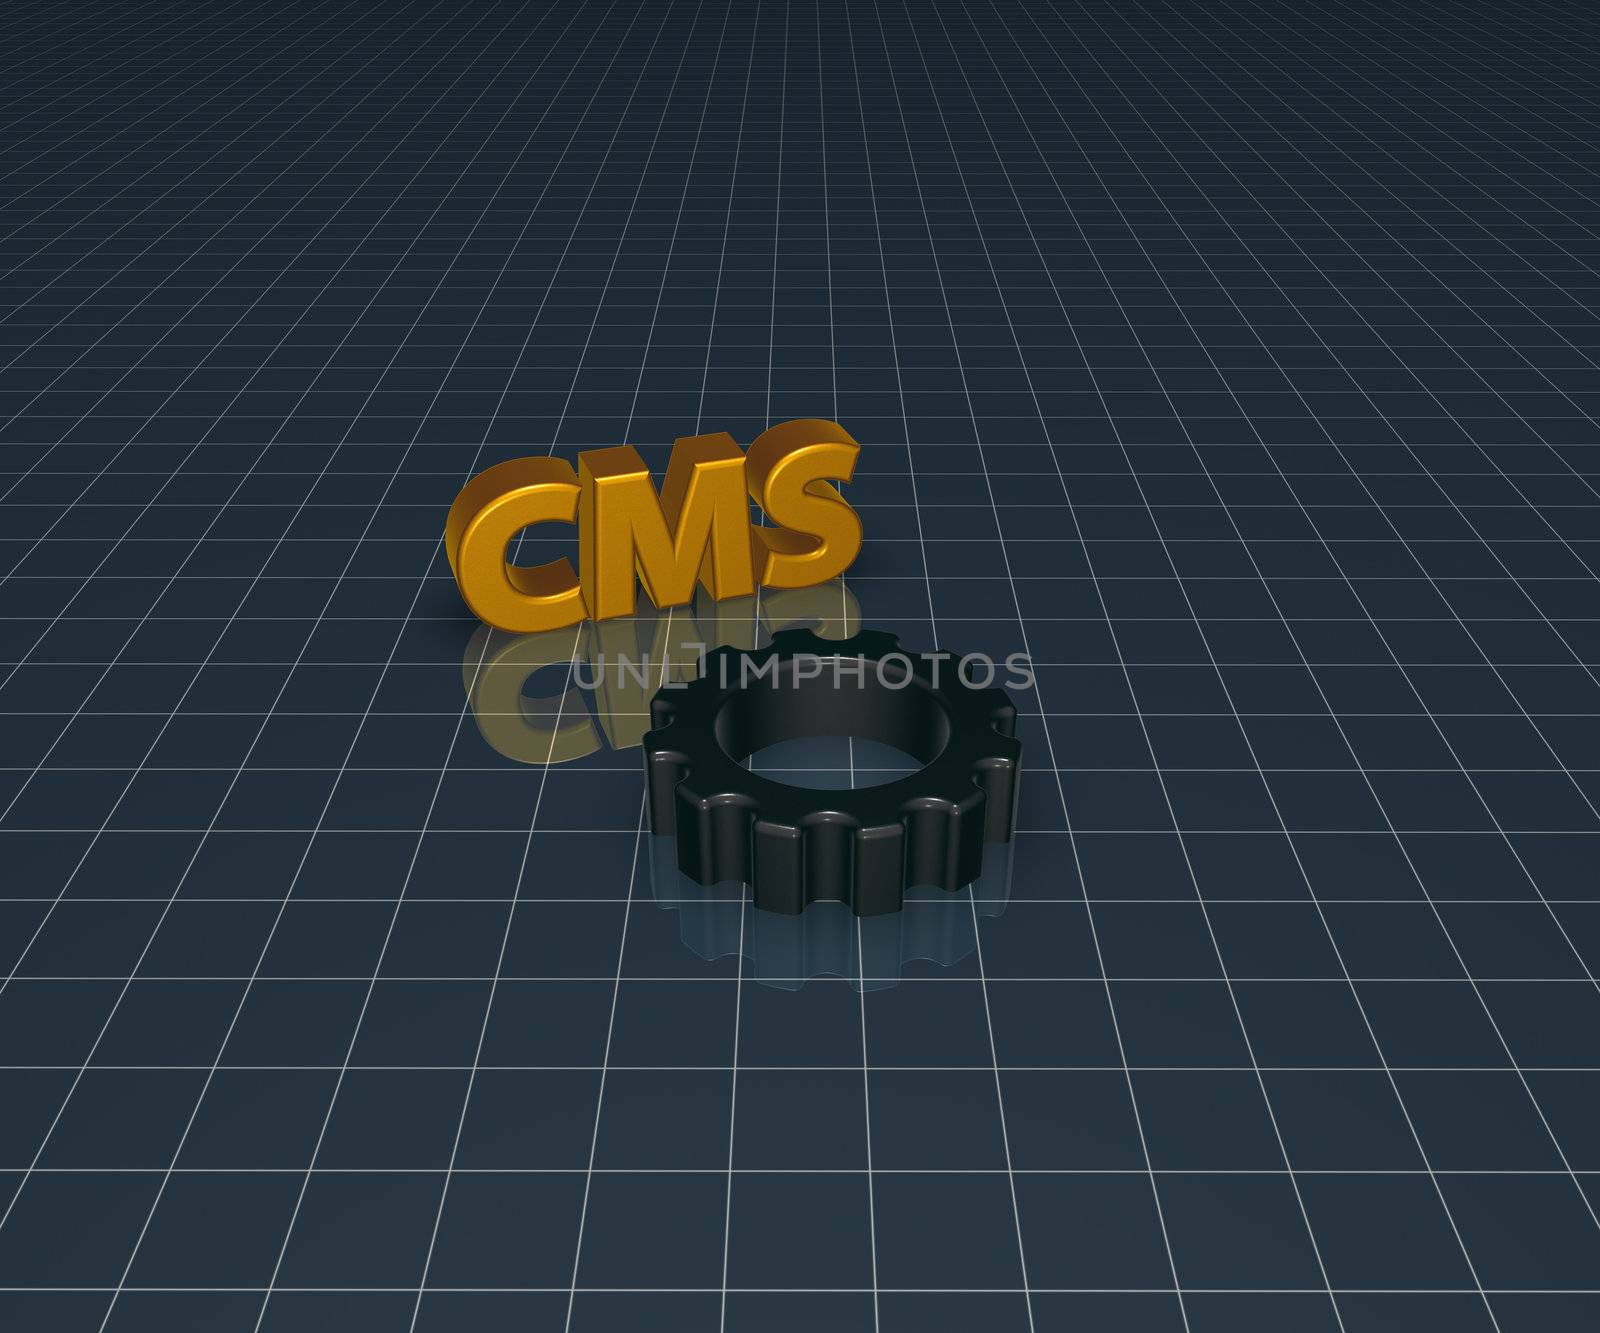 cms tag and gear wheel on blue squared background - 3d illustration